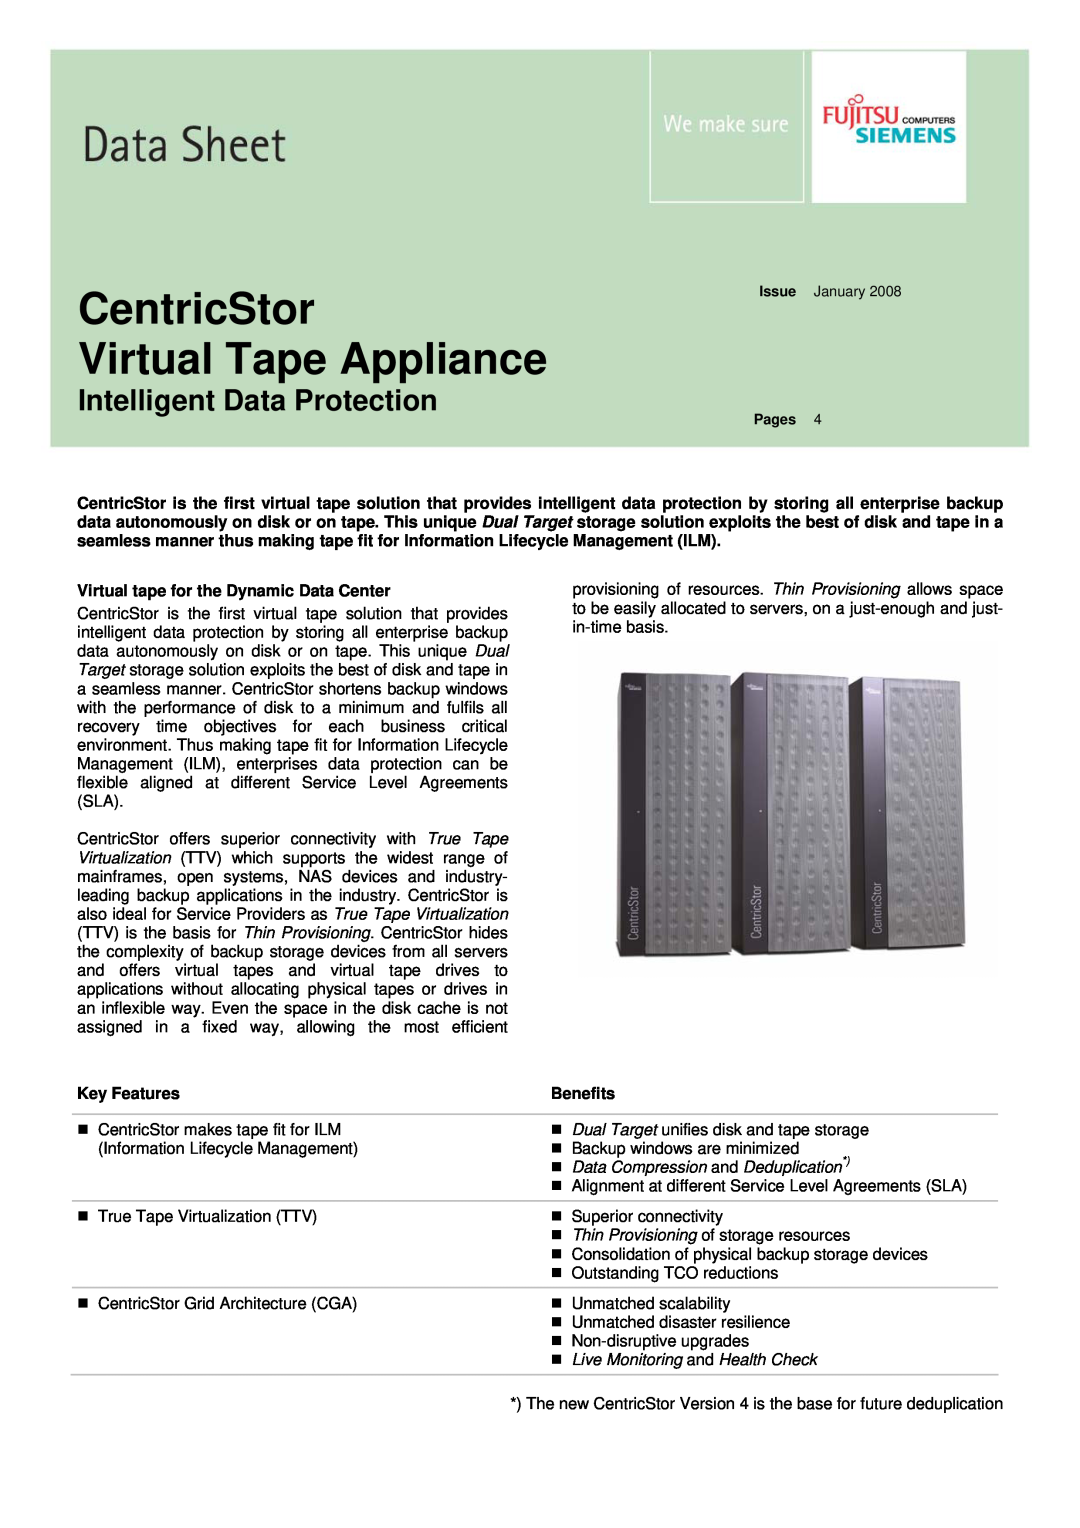 Fujitsu Siemens Computers Tape Appliance manual Virtual tape for the Dynamic Data Center, Key Features, Benefits 